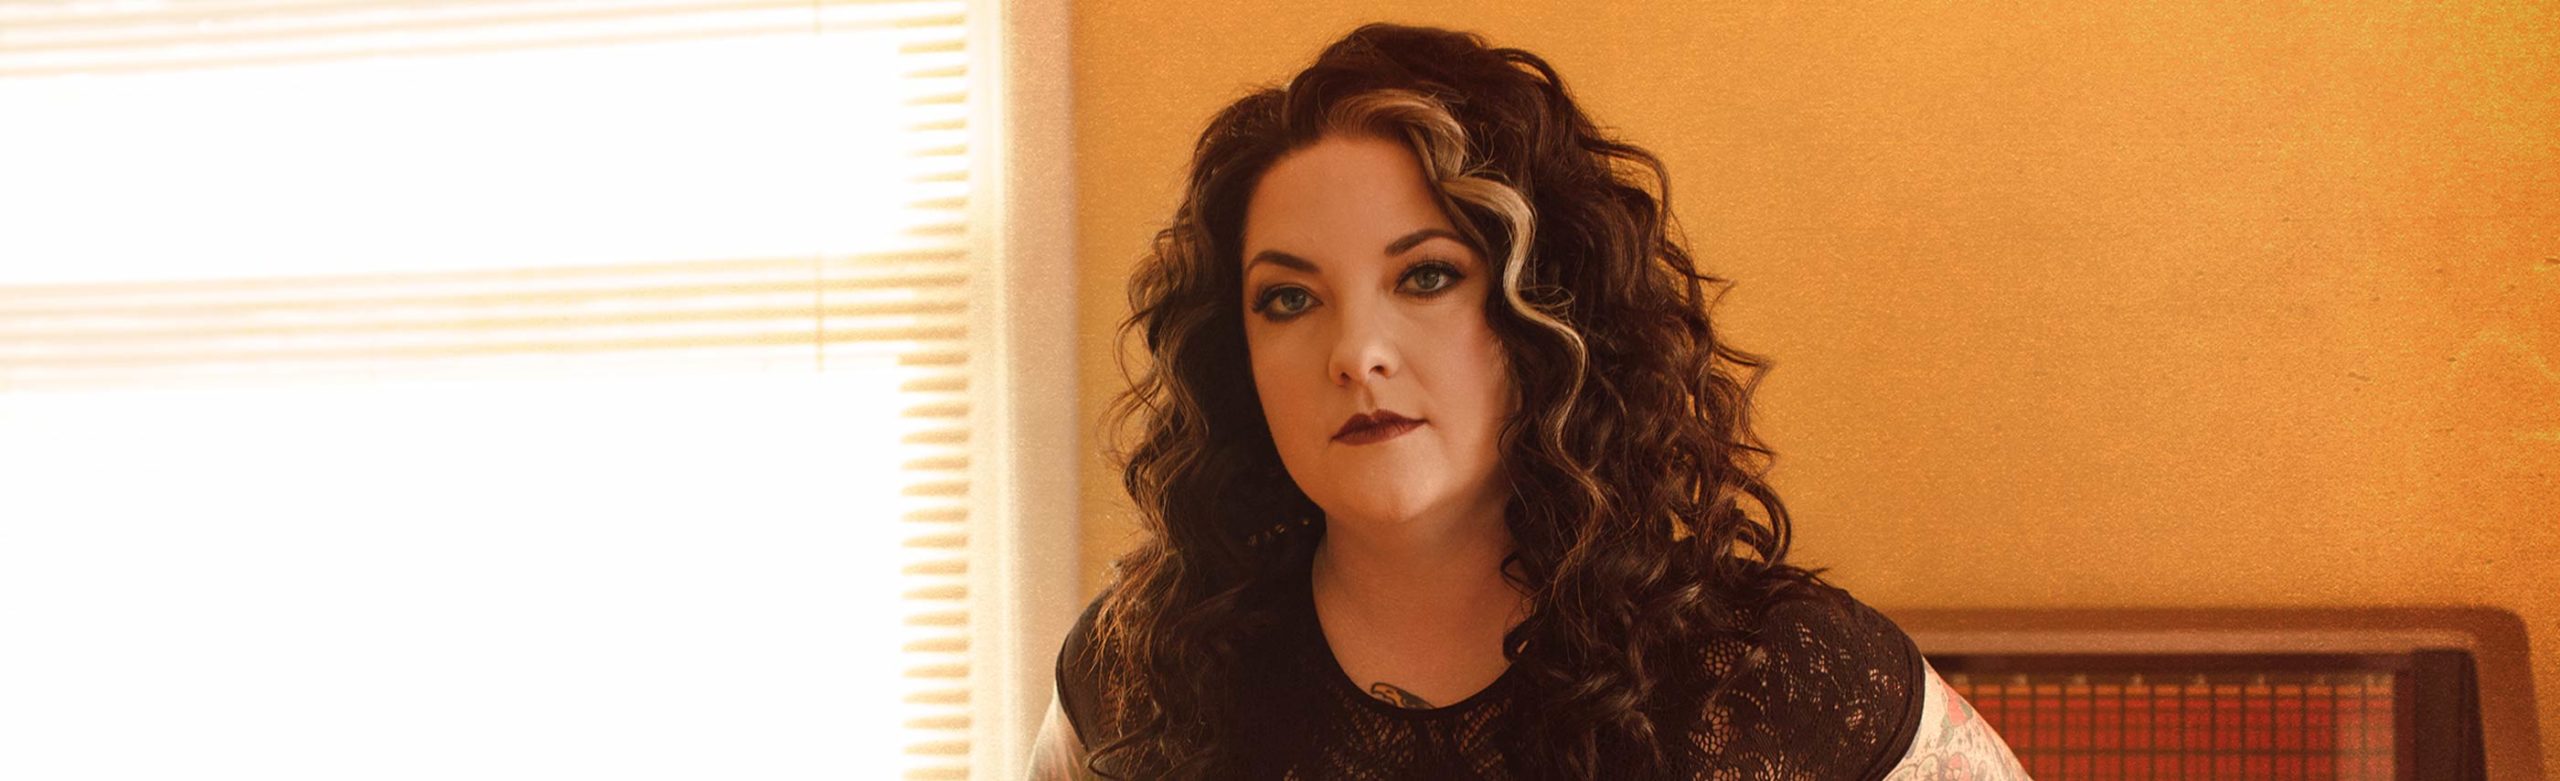 Ashley McBryde Tickets Giveaway 2022 Image